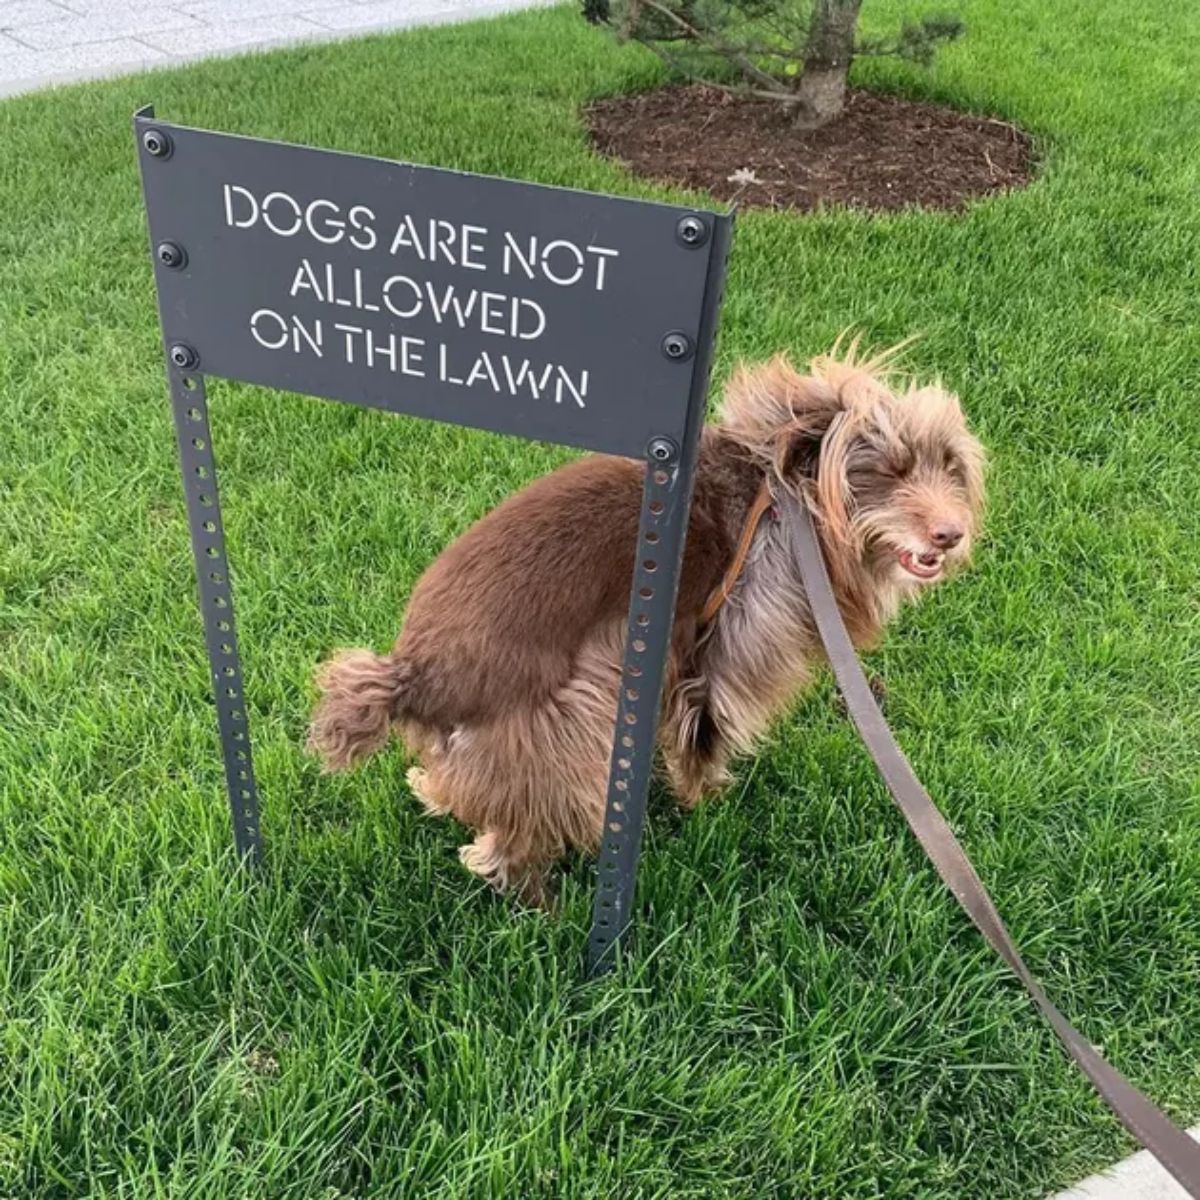 fluffy brown dog standing on grass under a DOGS ARE NOT ALLOWED ON THE LAWN sign